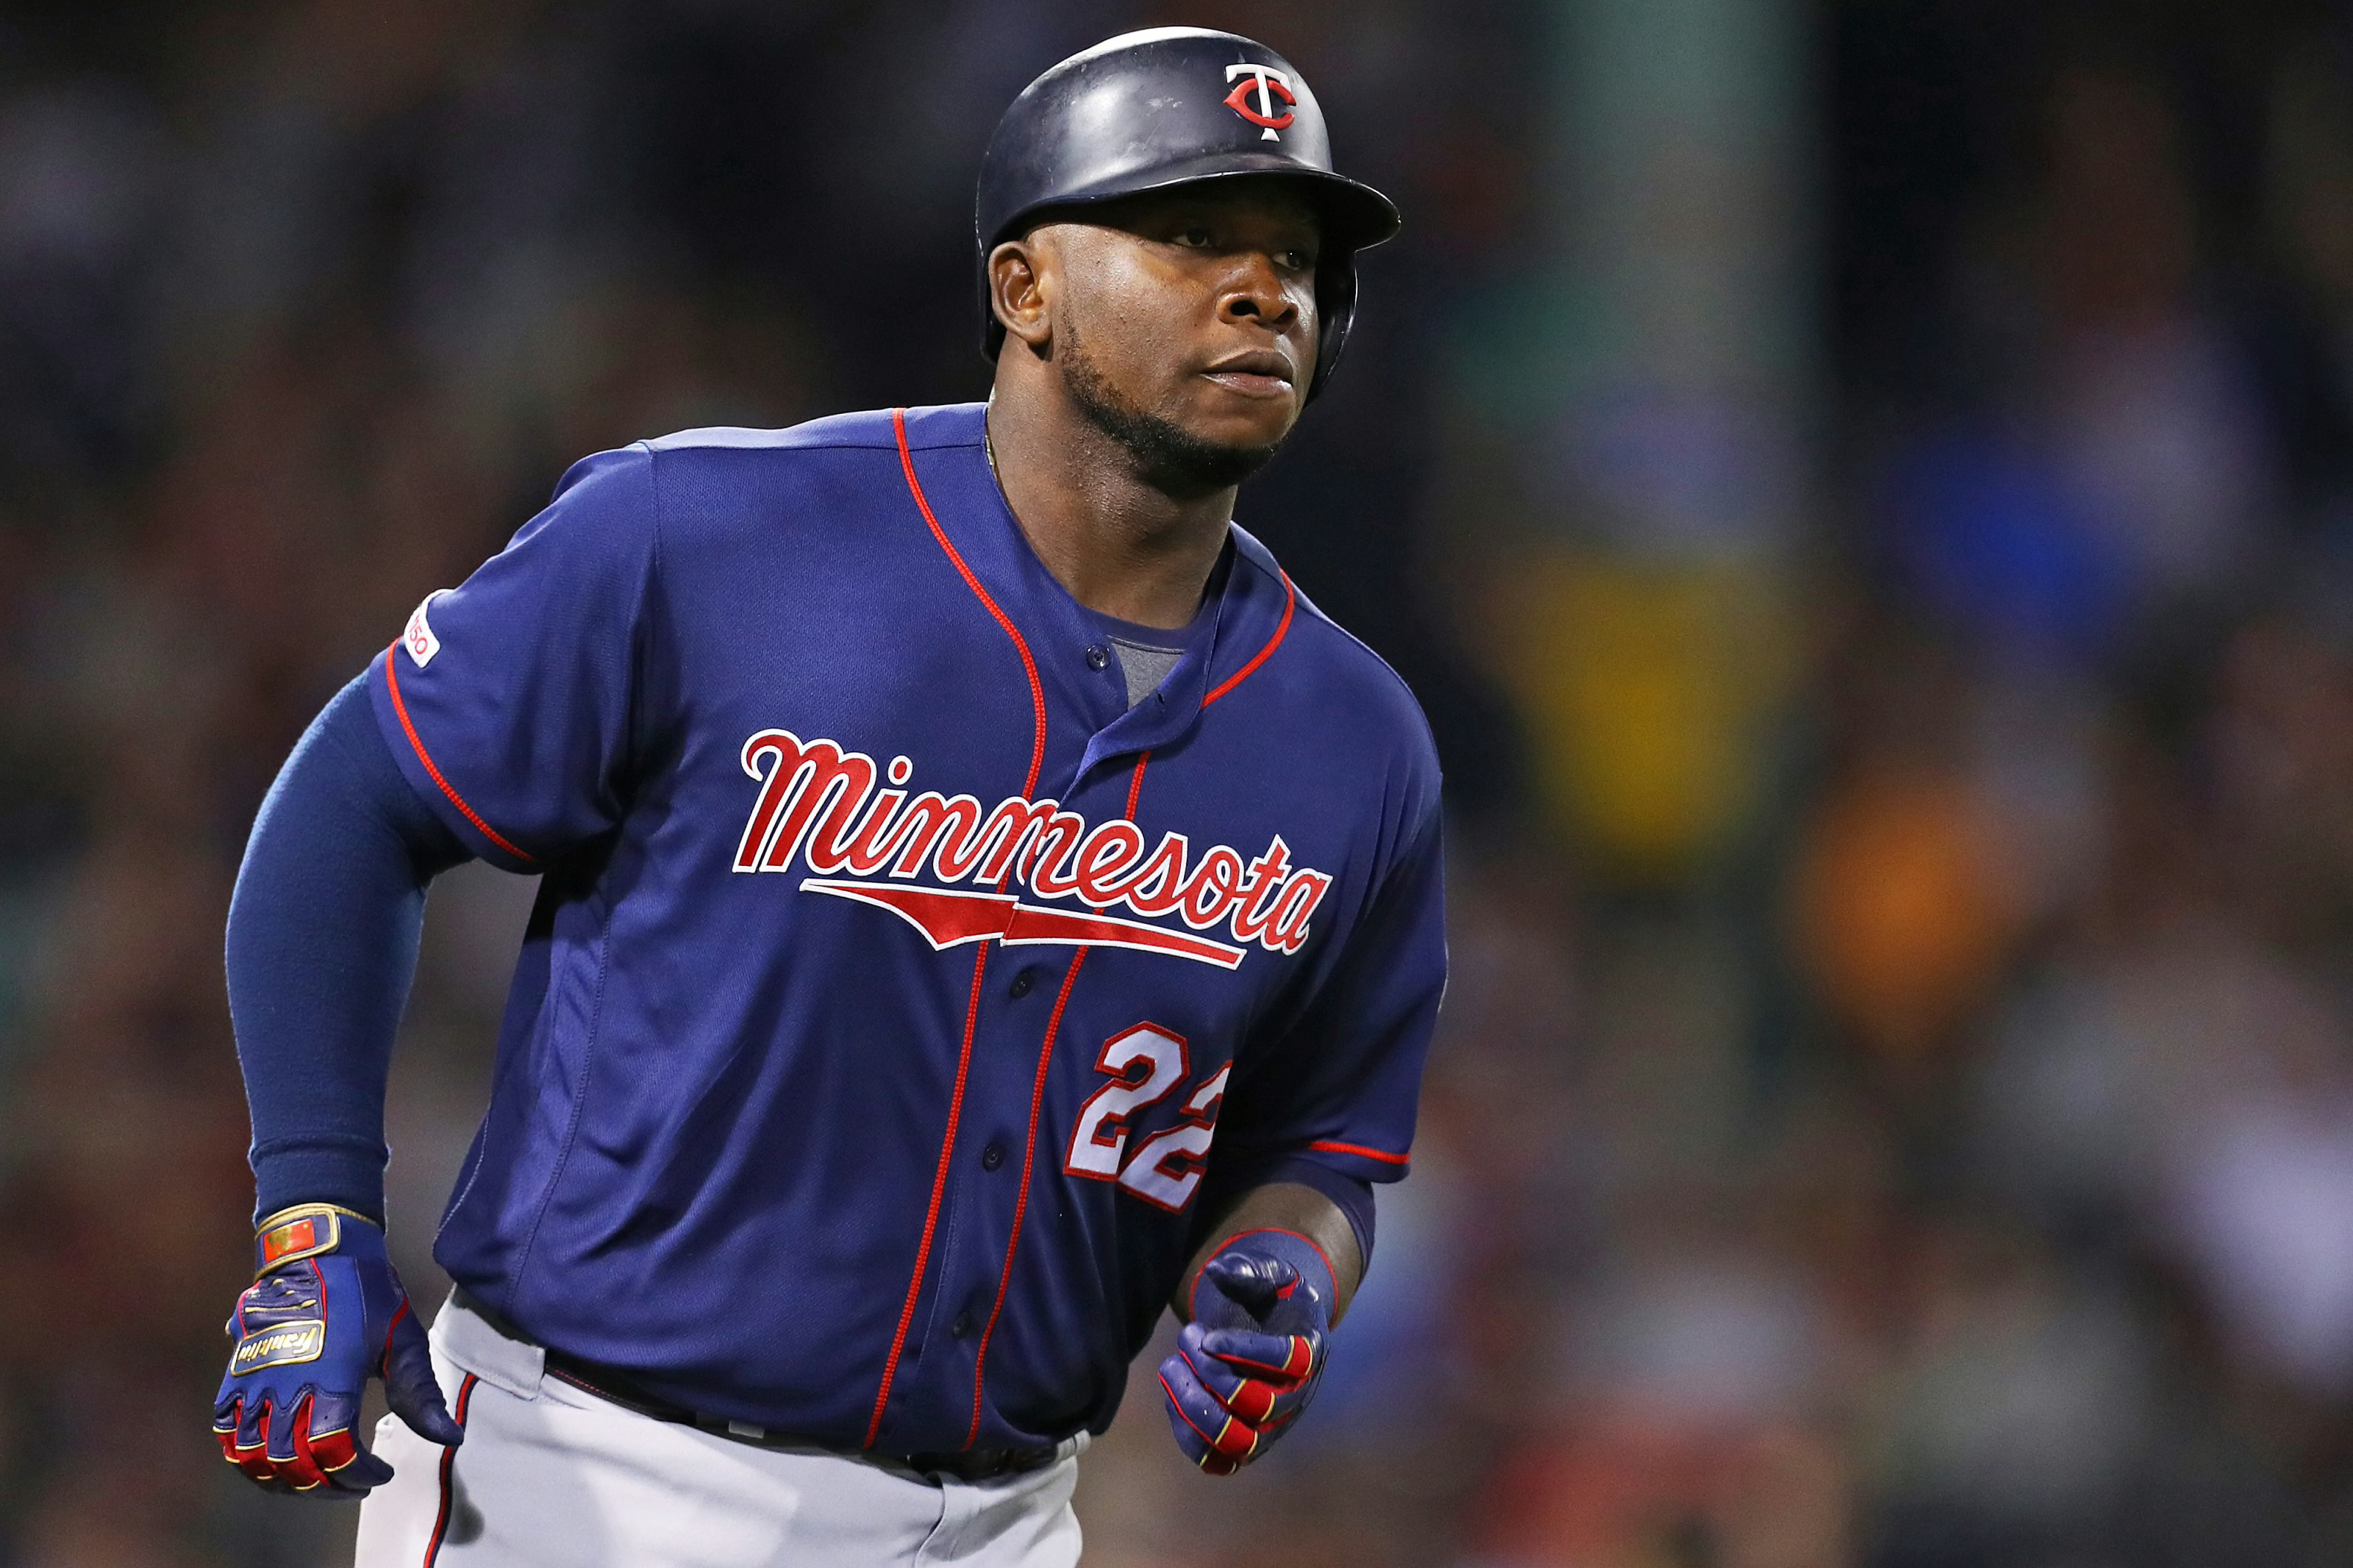 Minnesota Twins 3 Reasons why Miguel Sanó will Finish Strong in 2020